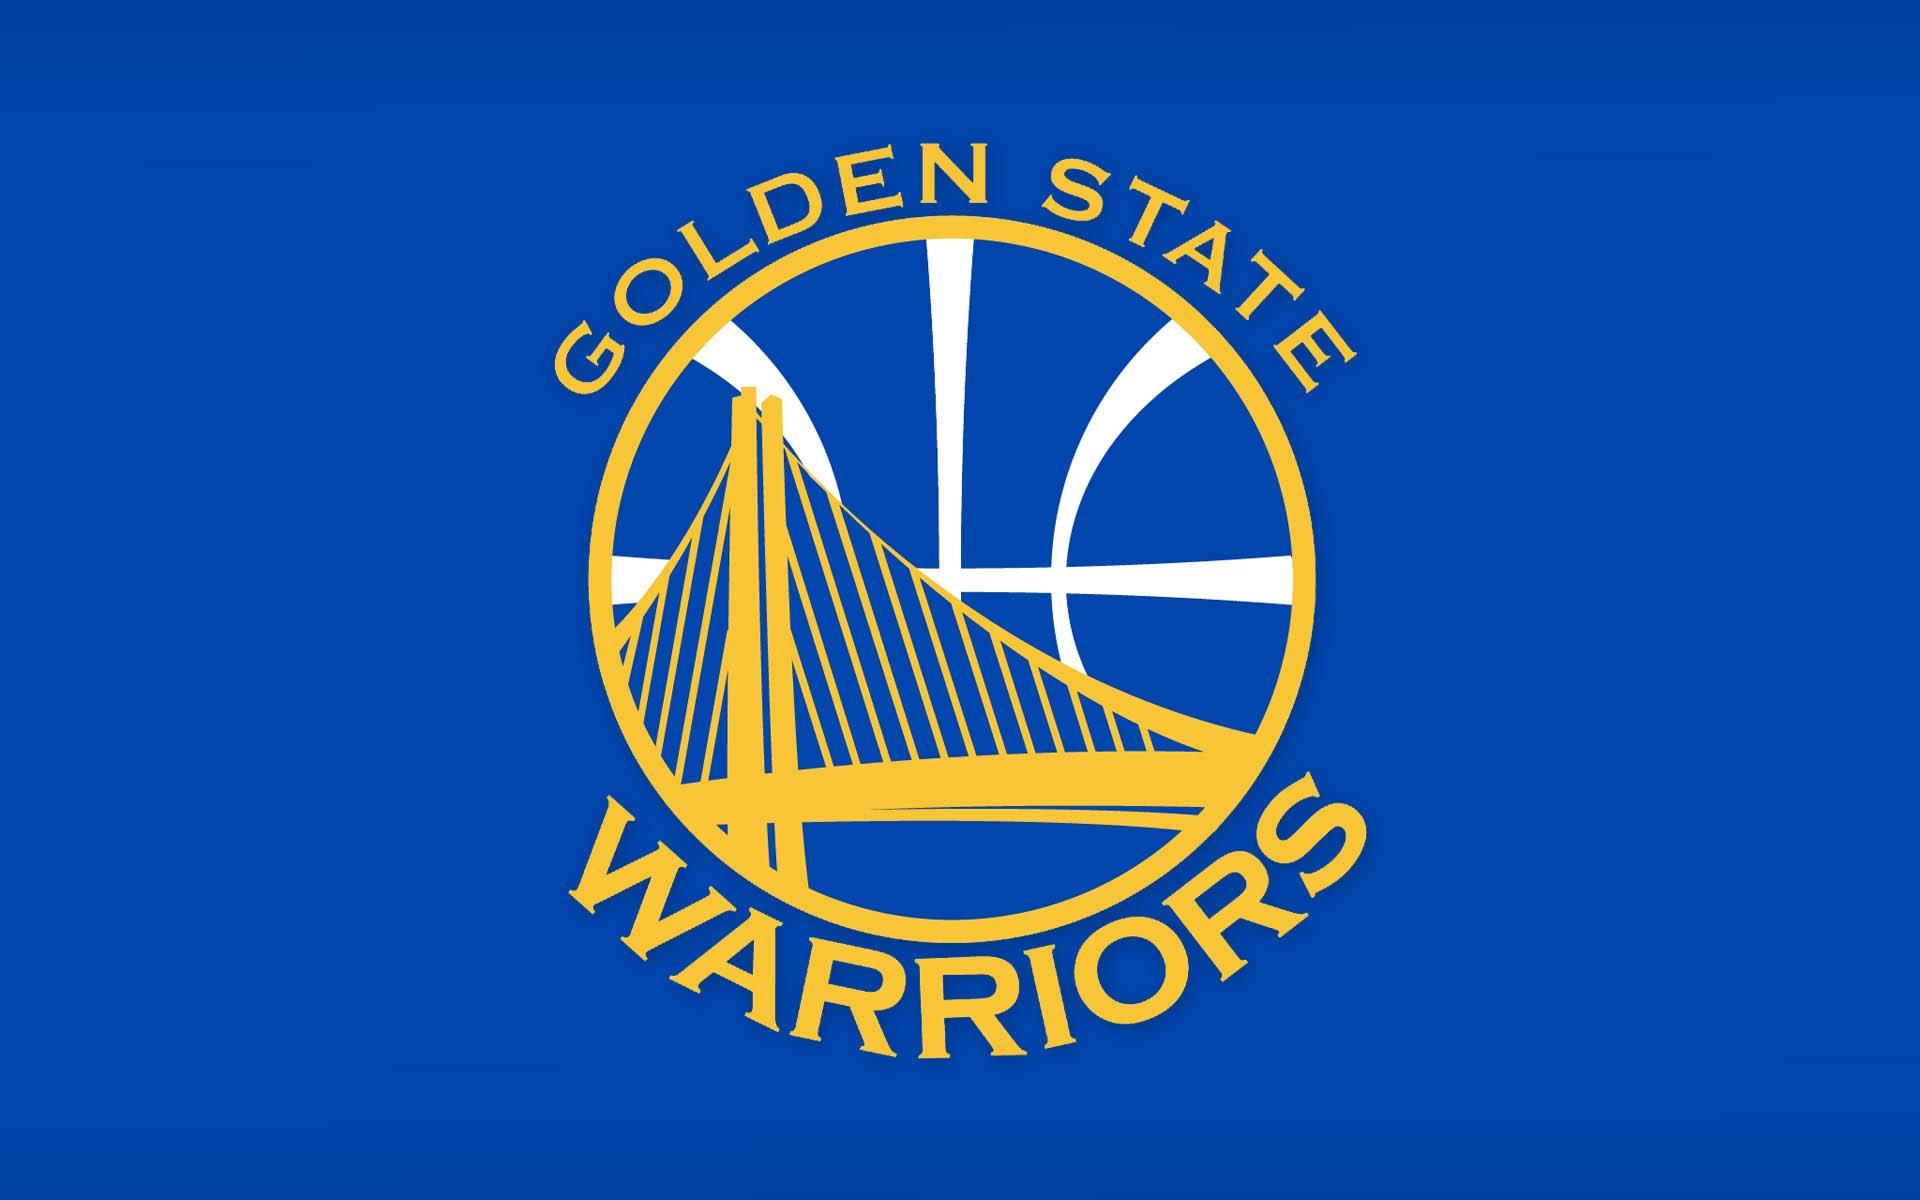 Golden State Warriors Logo - Crooked Scoreboard: Humor and Culture In Sports. How to Beat